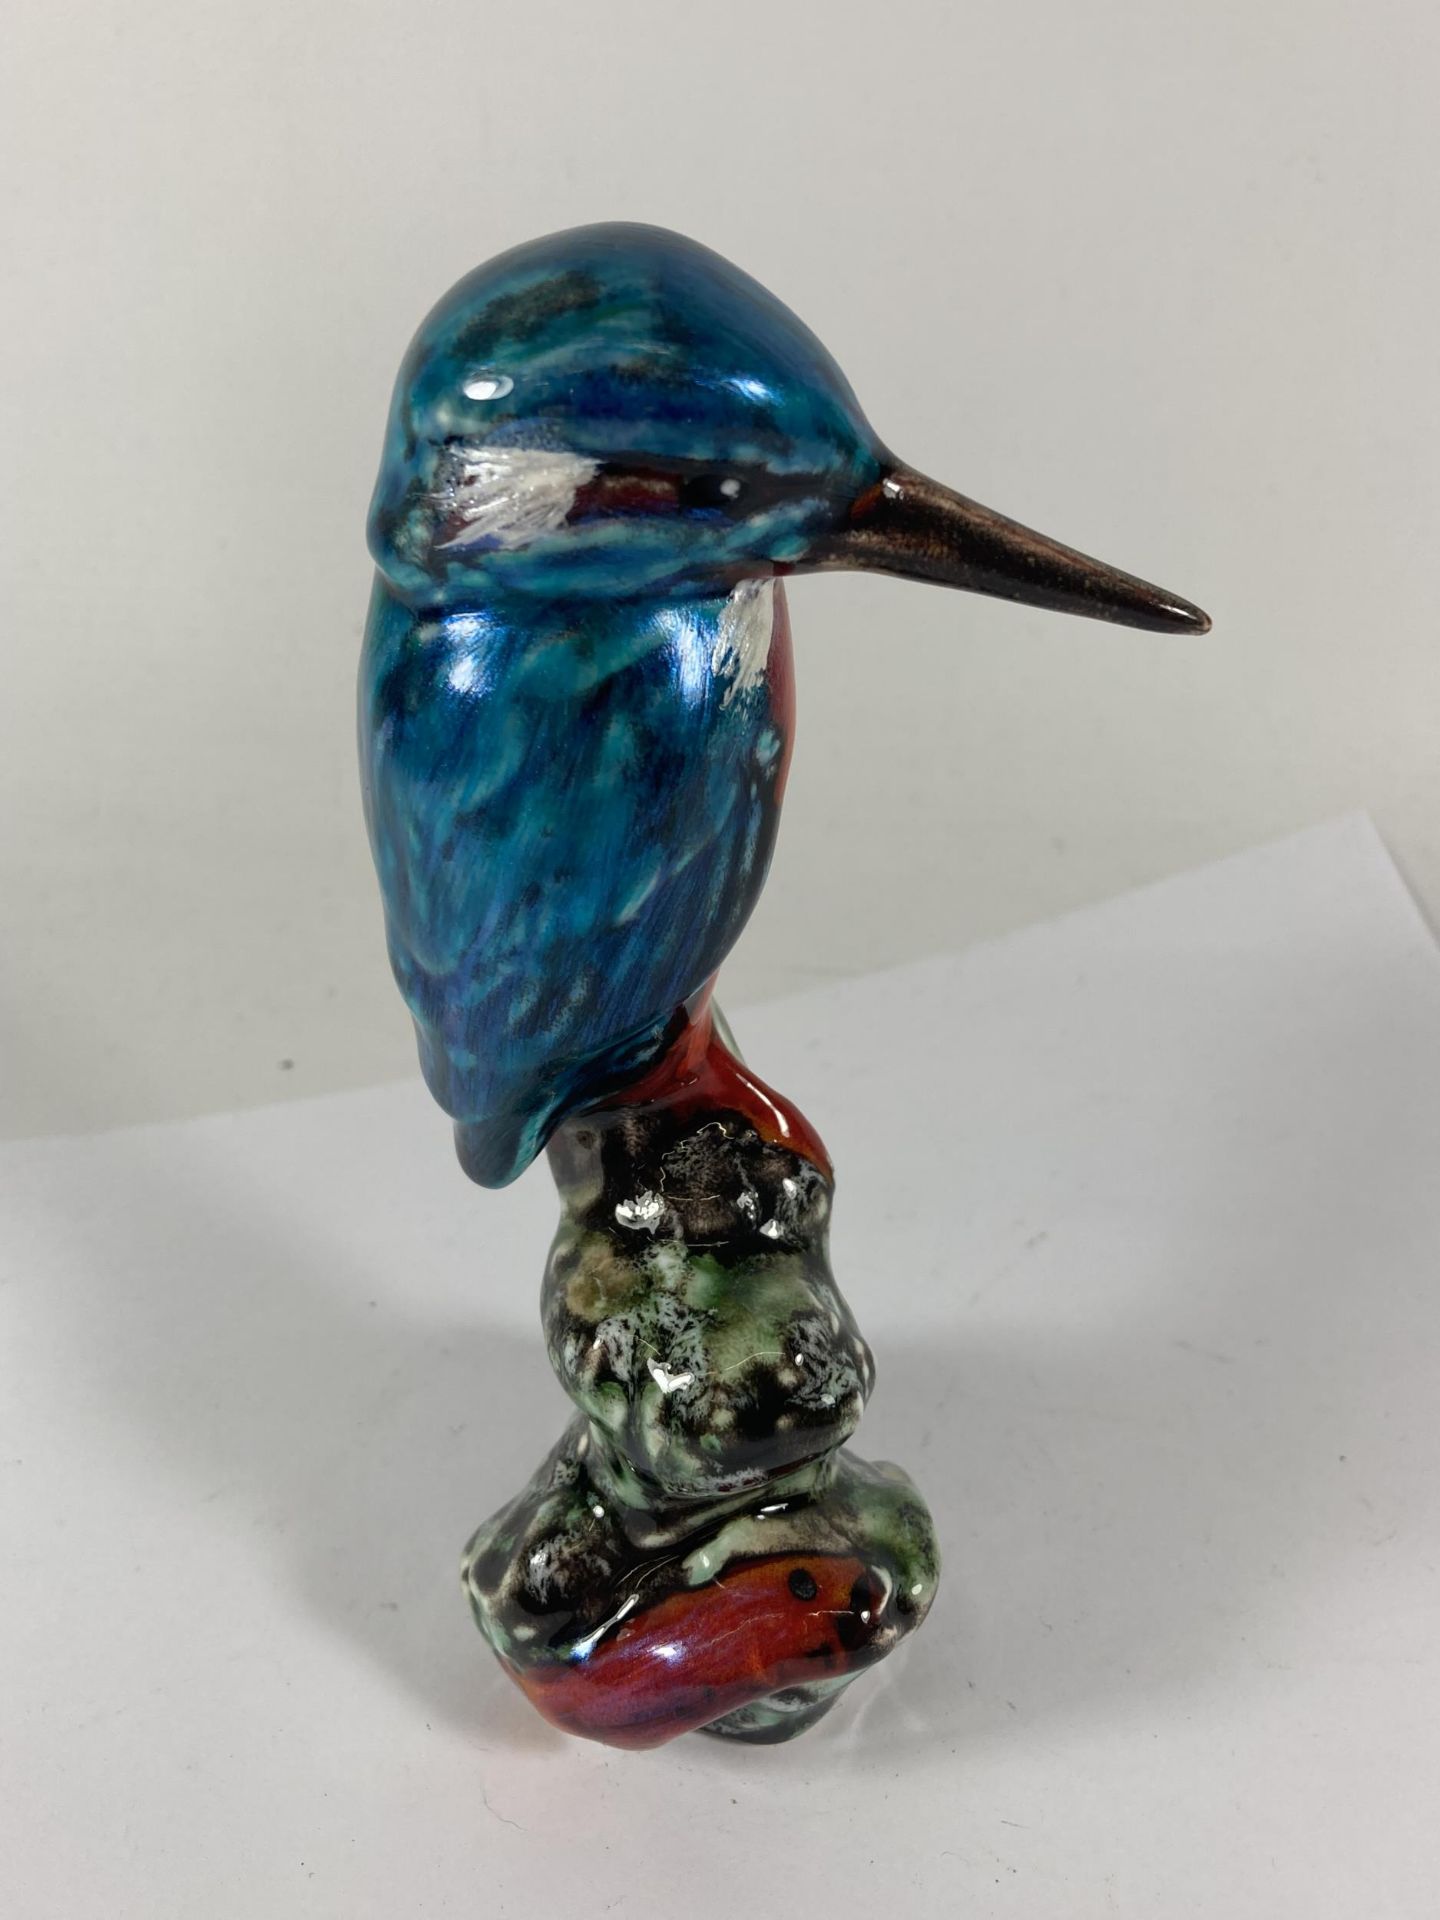 A HANDPAINTED AND SIGNED IN GOLD ANITA HARRIS KINGFISHER FIGURE - Image 3 of 6